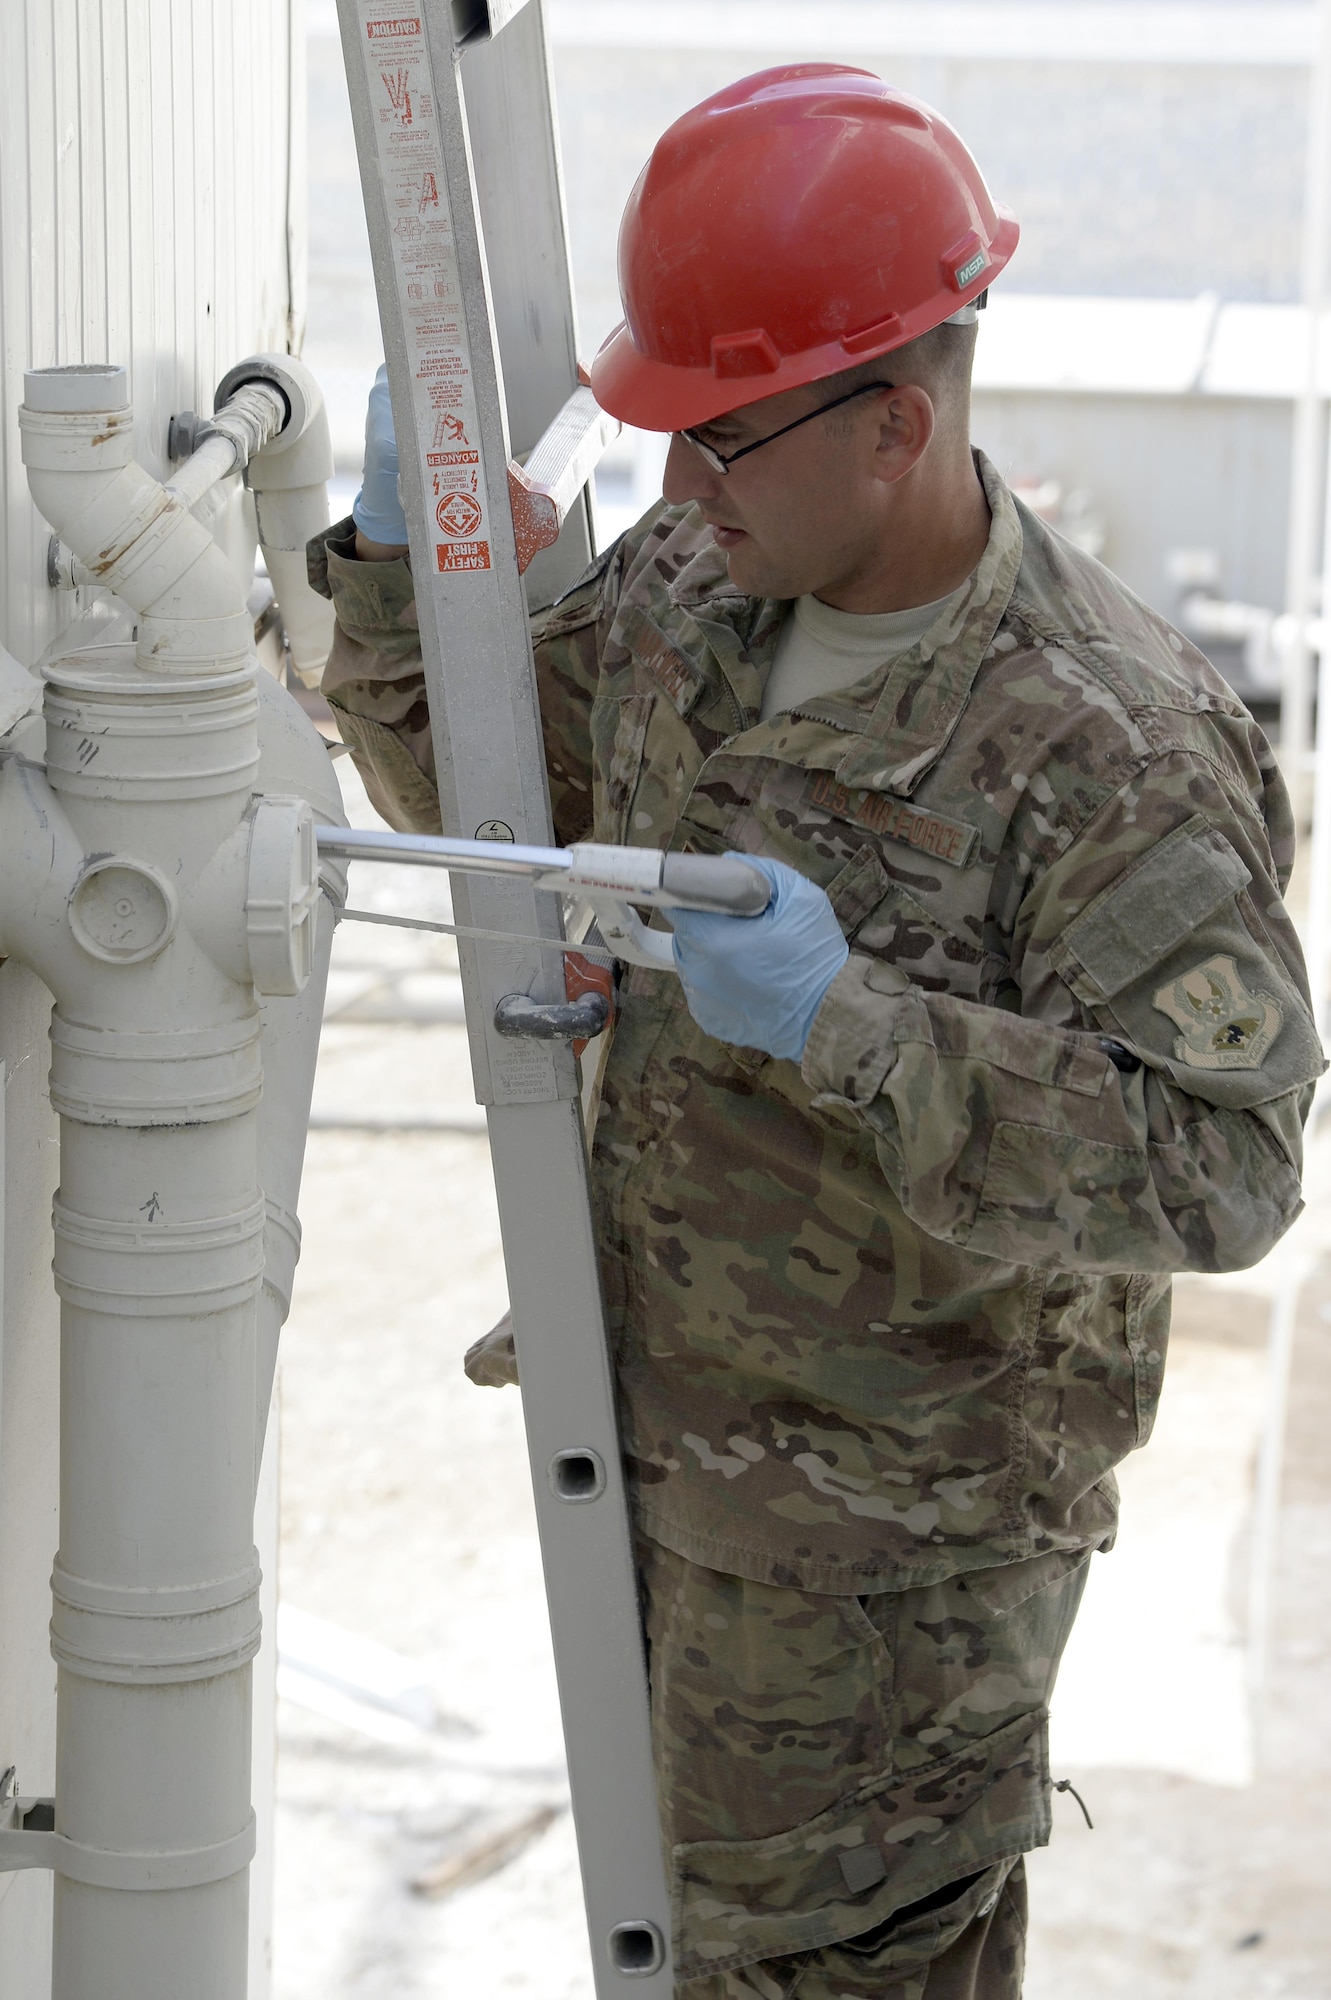 Tech. Sgt. Ronald, Expeditionary Prime Base Engineer Emergency Force Squadron water and fuels systems manager, cuts polyvinyl chloride pipe to an old shower cadillac at an undisclosed location in Southwest Asia Mar. 2, 2015. The EPBS has been working on several base projects to include replacing $280K worth of new showers in the Army barracks. Ronald is currently deployed from the 434th Civil Engineer Squadron out of Grissom Air Reserve Base, Indiana. (U.S. Air Force photo/Tech. Sgt. Marie Brown) (RELEASED)